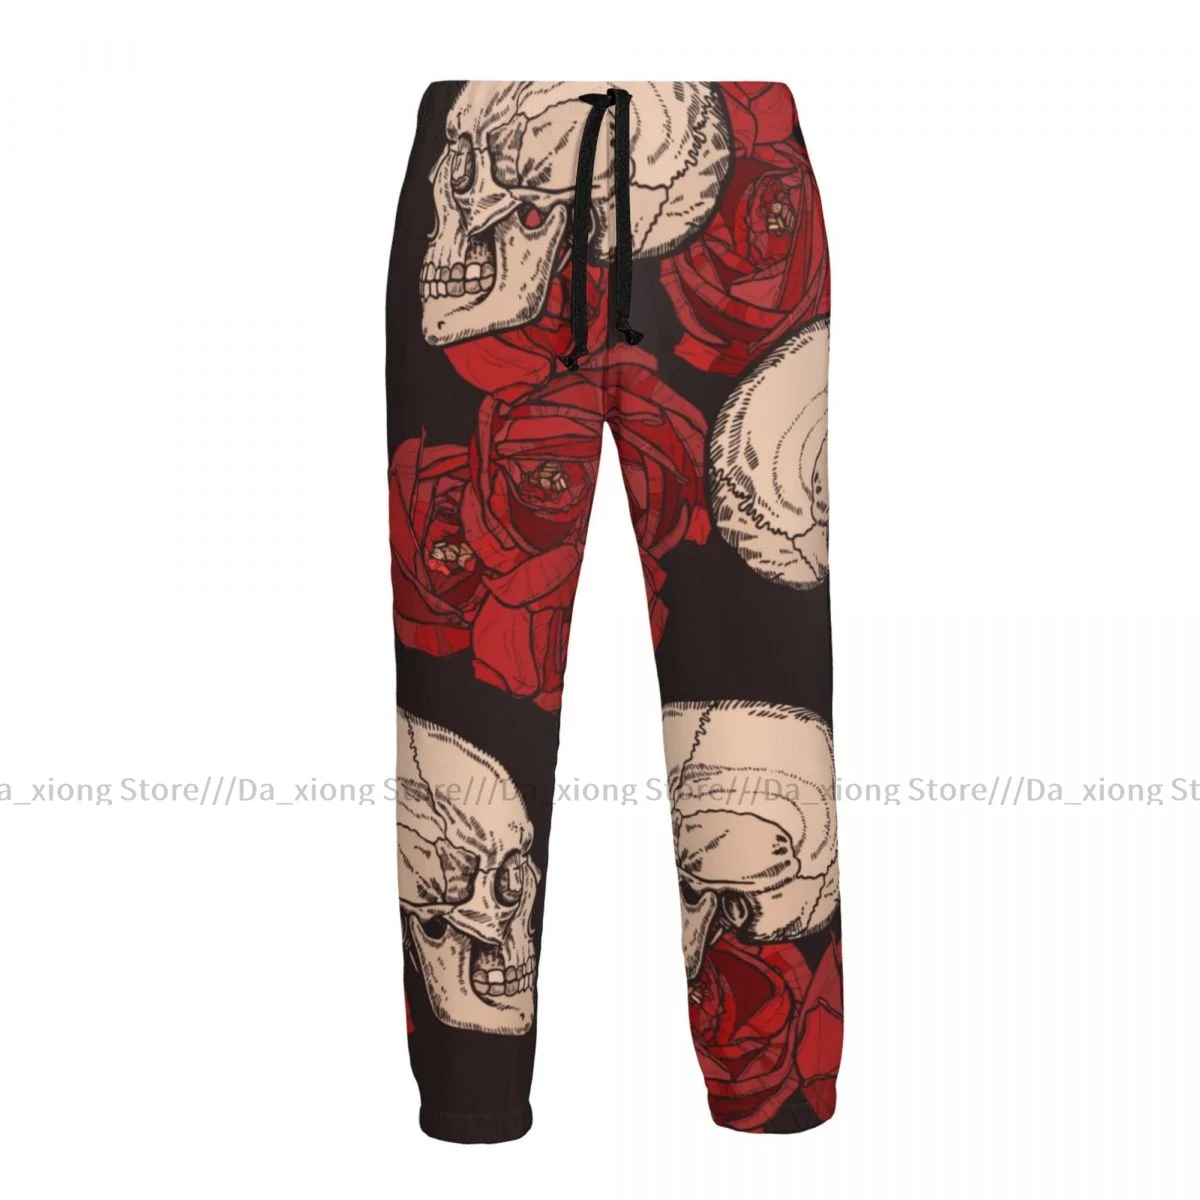 

Men Jogging Pants Streetwear Loose Casual Trouser Gothic Pattern With Skulls And Red Roses Man Pants Sweatpants